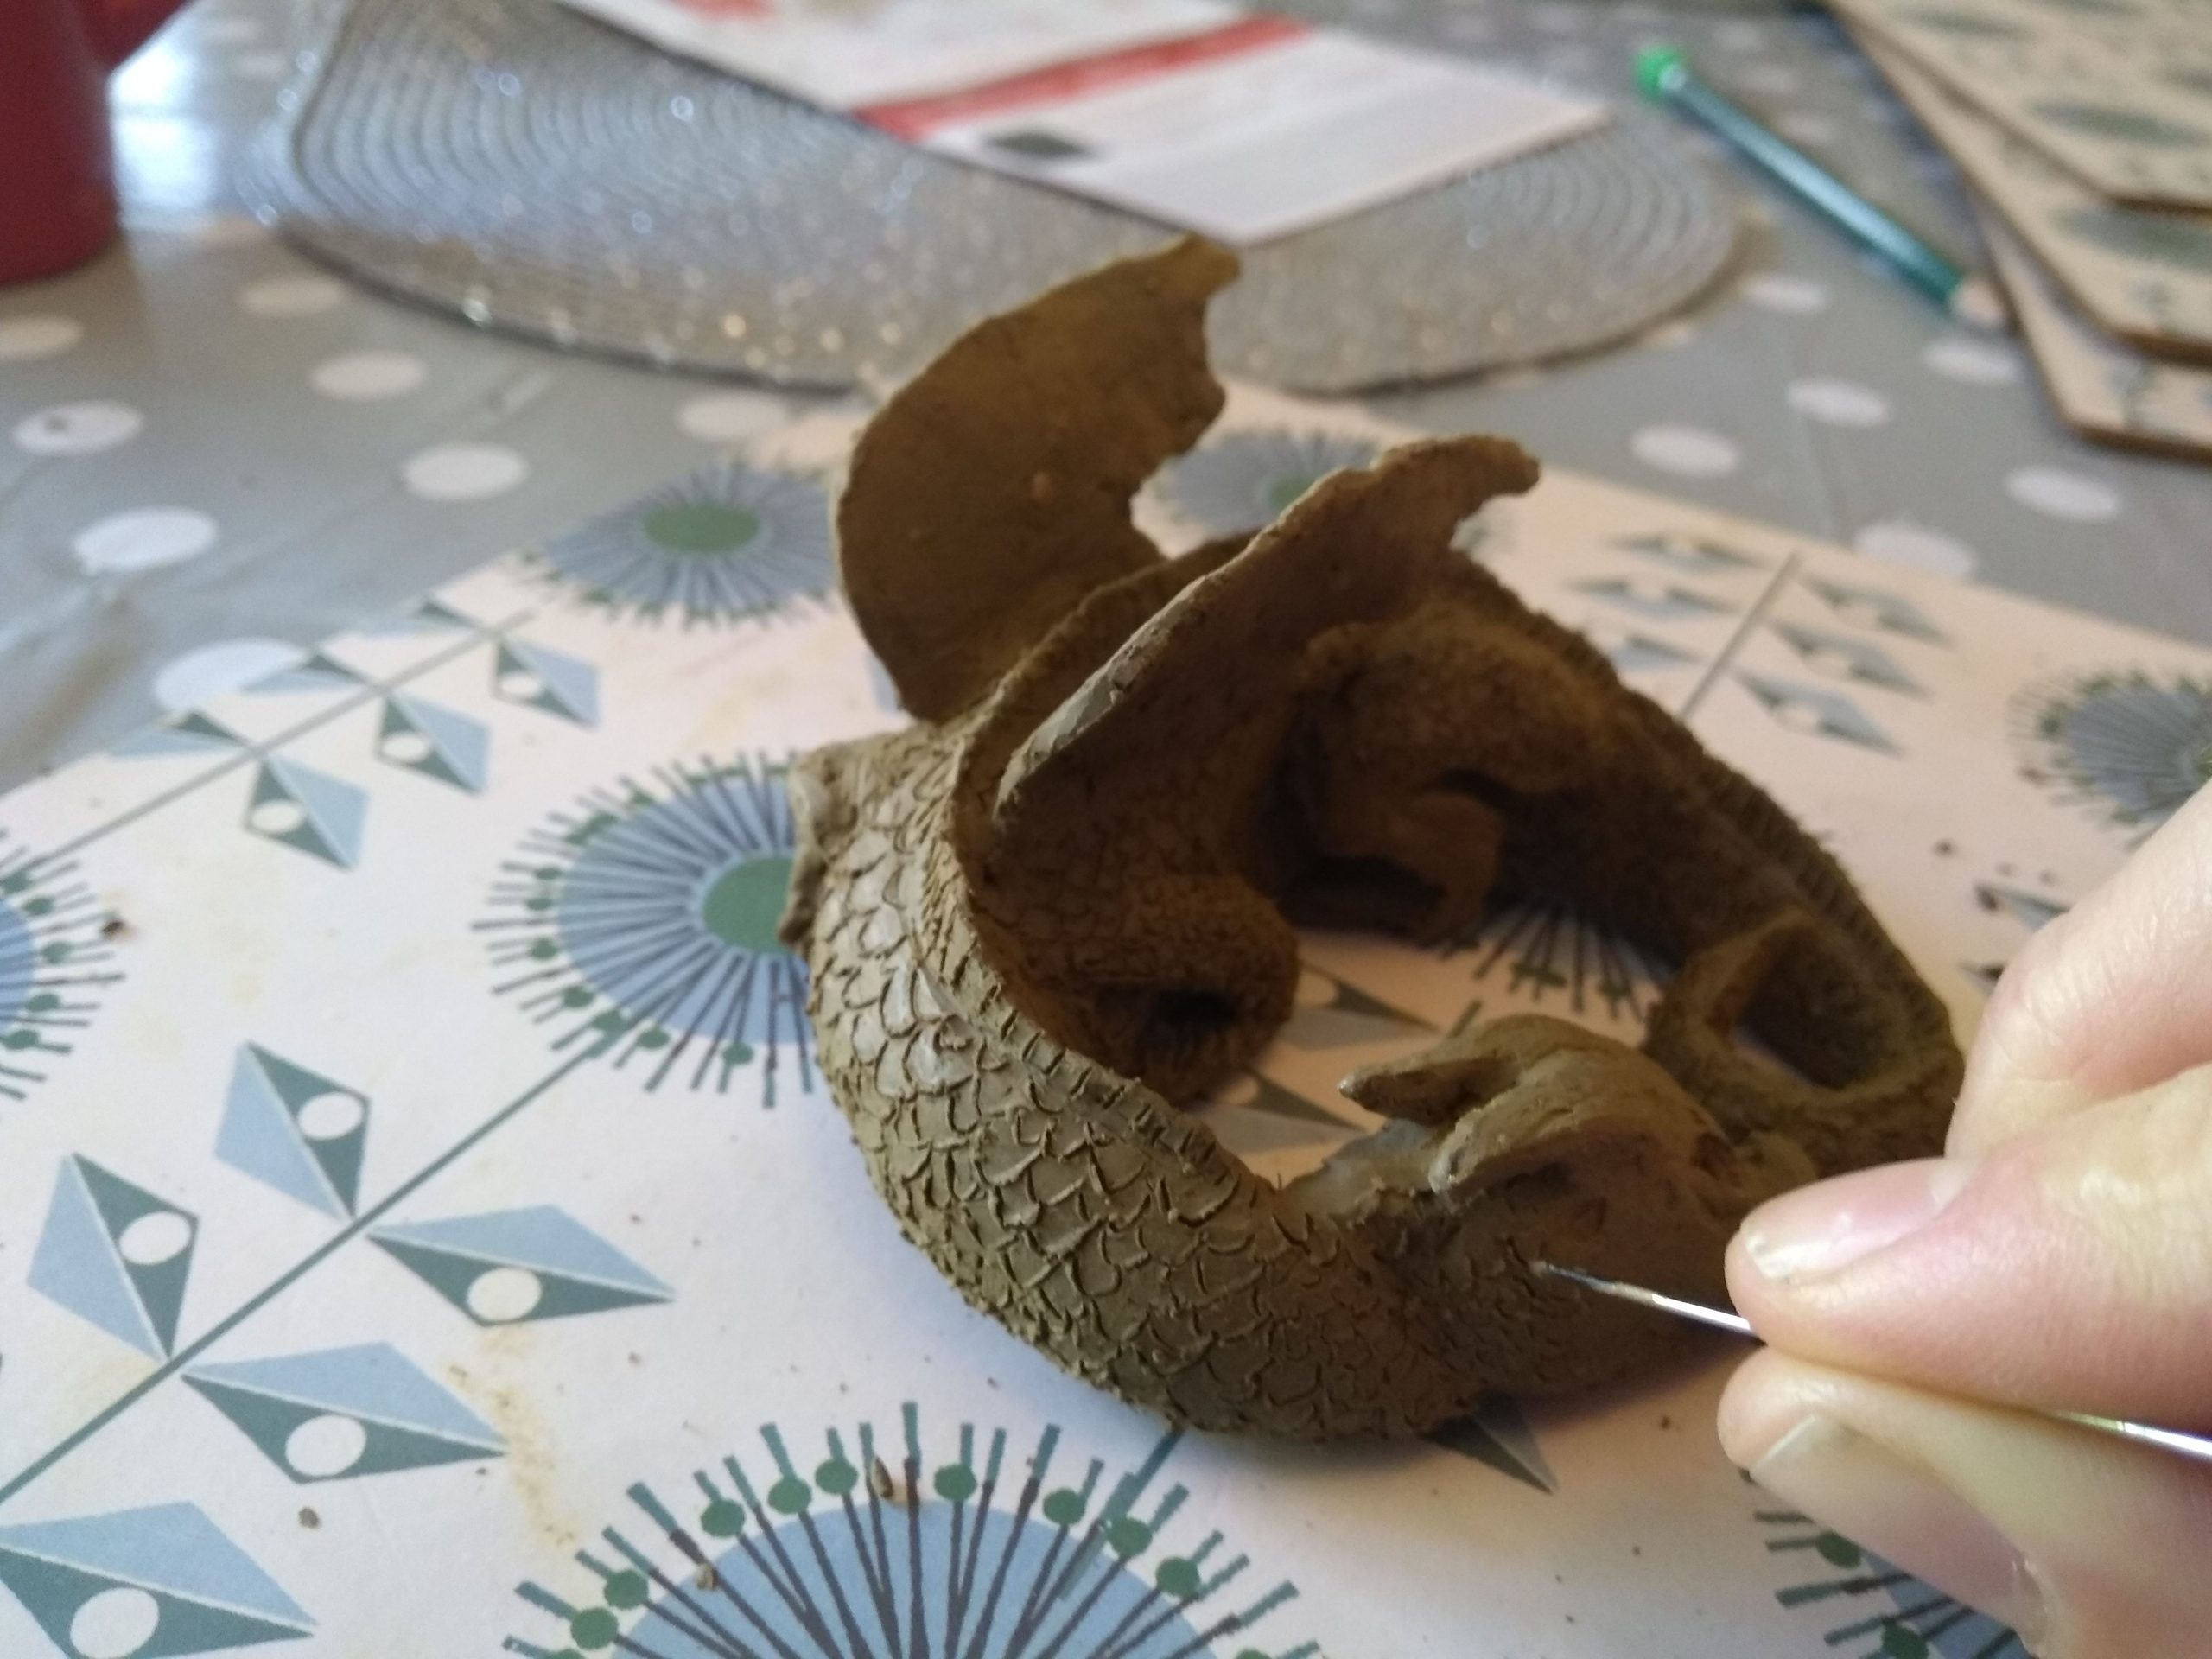 Work in progress photo of a clay dragon, a hand is marking on the dragon scales.